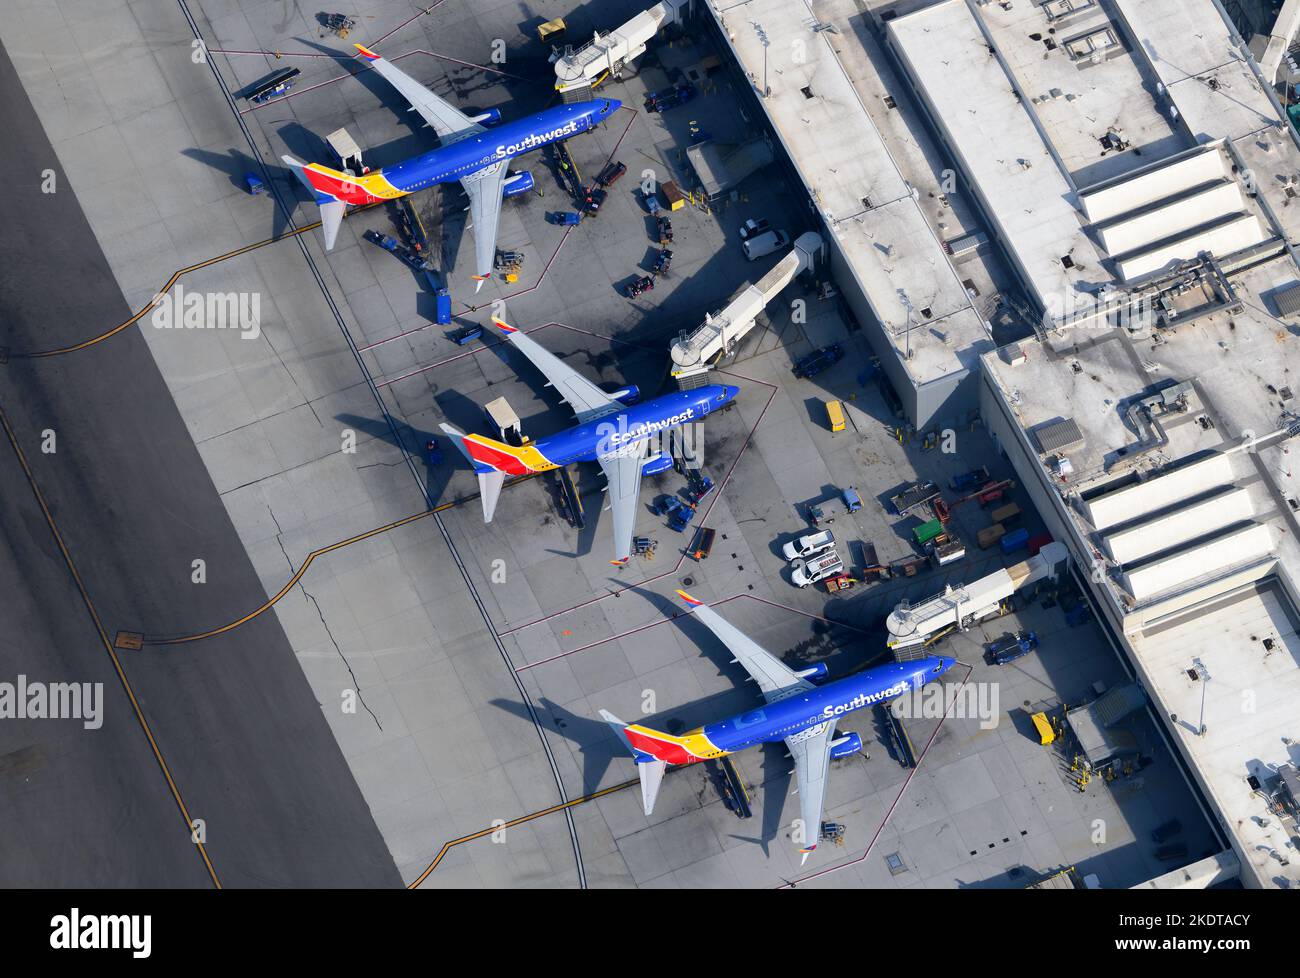 Southwest Airlines Terminal 1 at Los Angeles International Airport. Aerial view Southwest Airlines Boeing 737 aircraft lined up at LAX Airport T1. Stock Photo